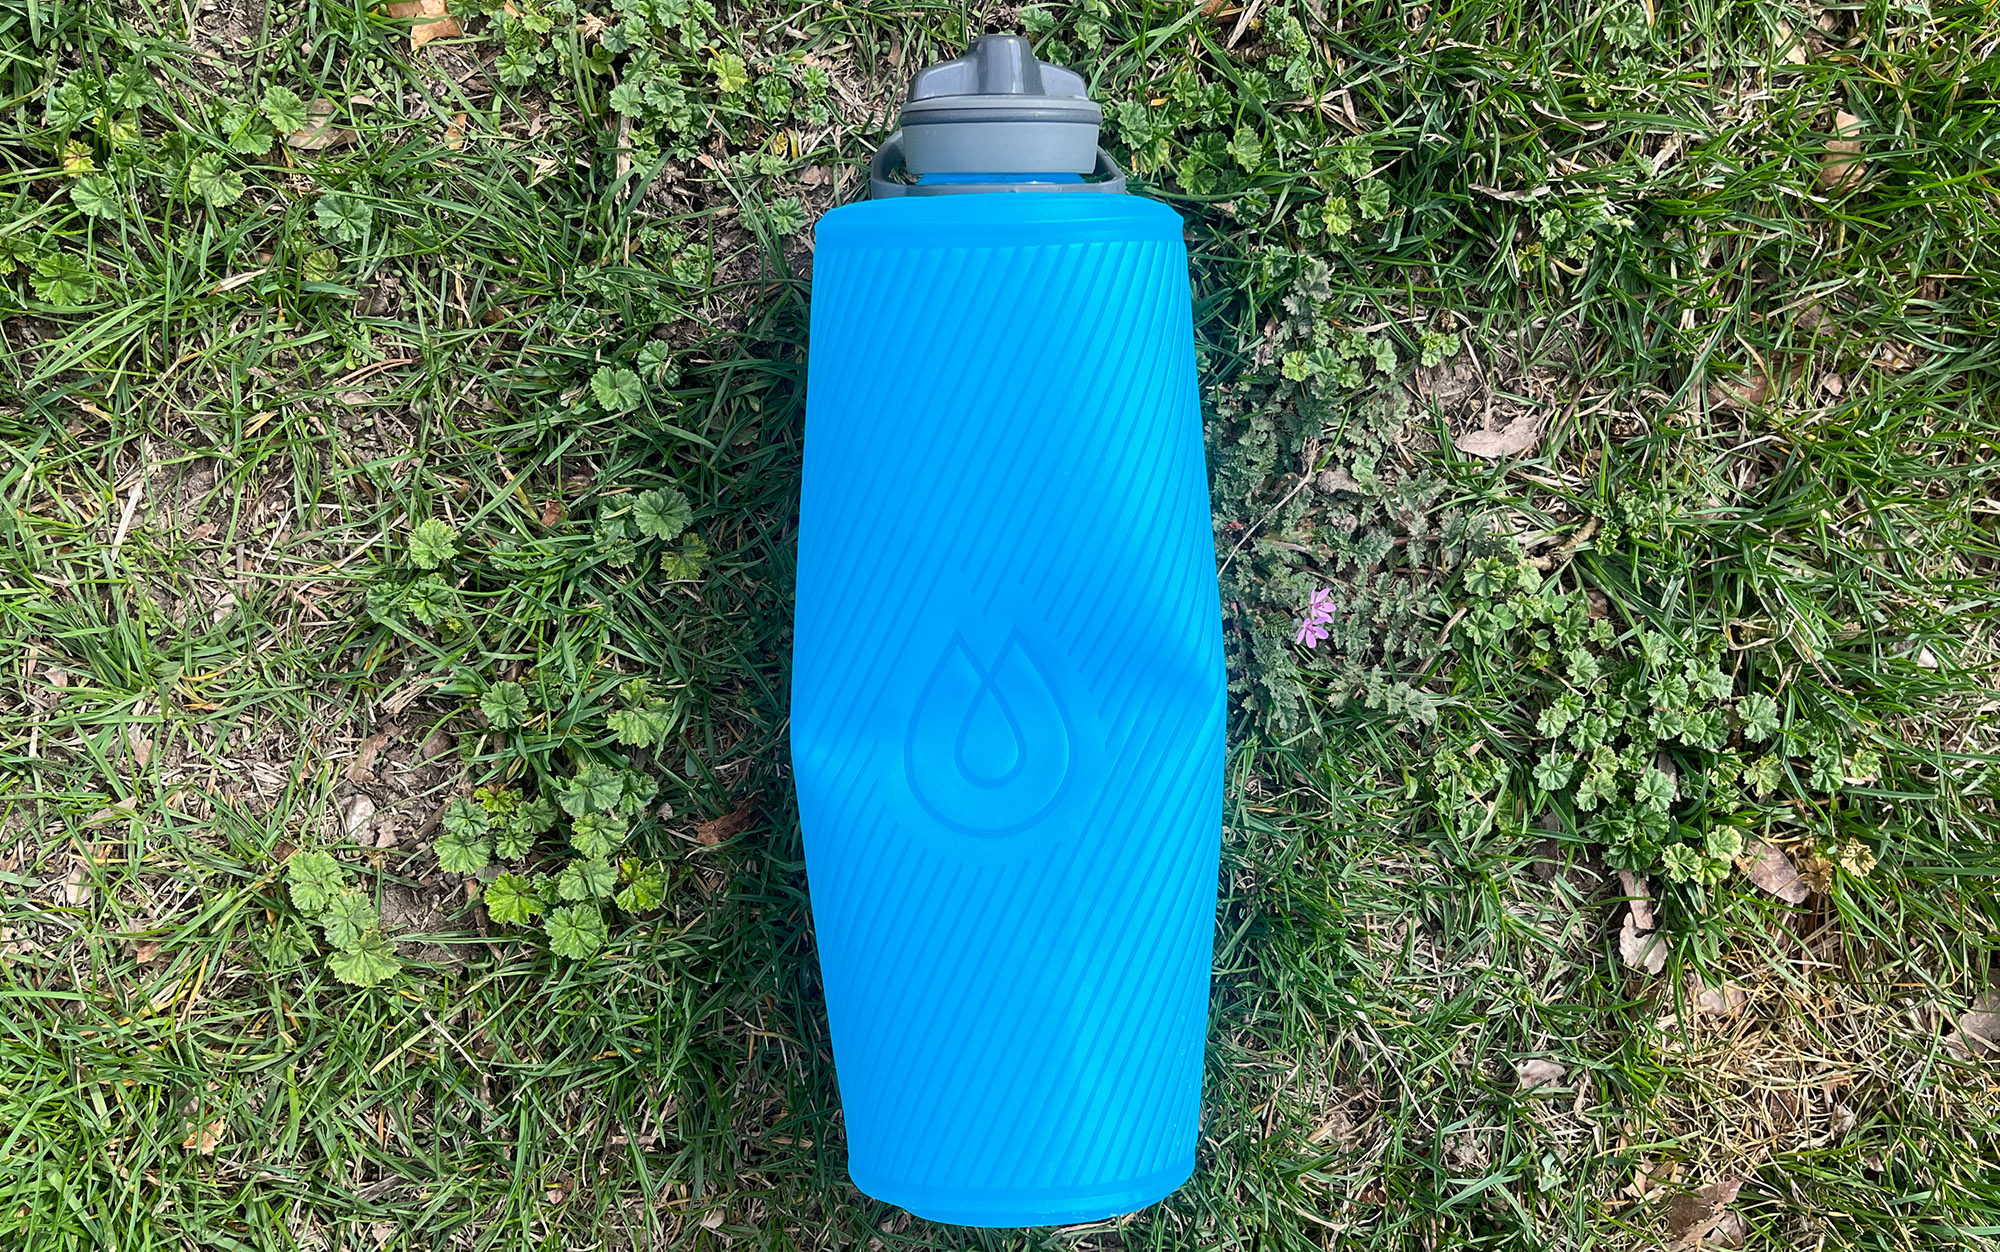 We tested the Hydrapak Flux.